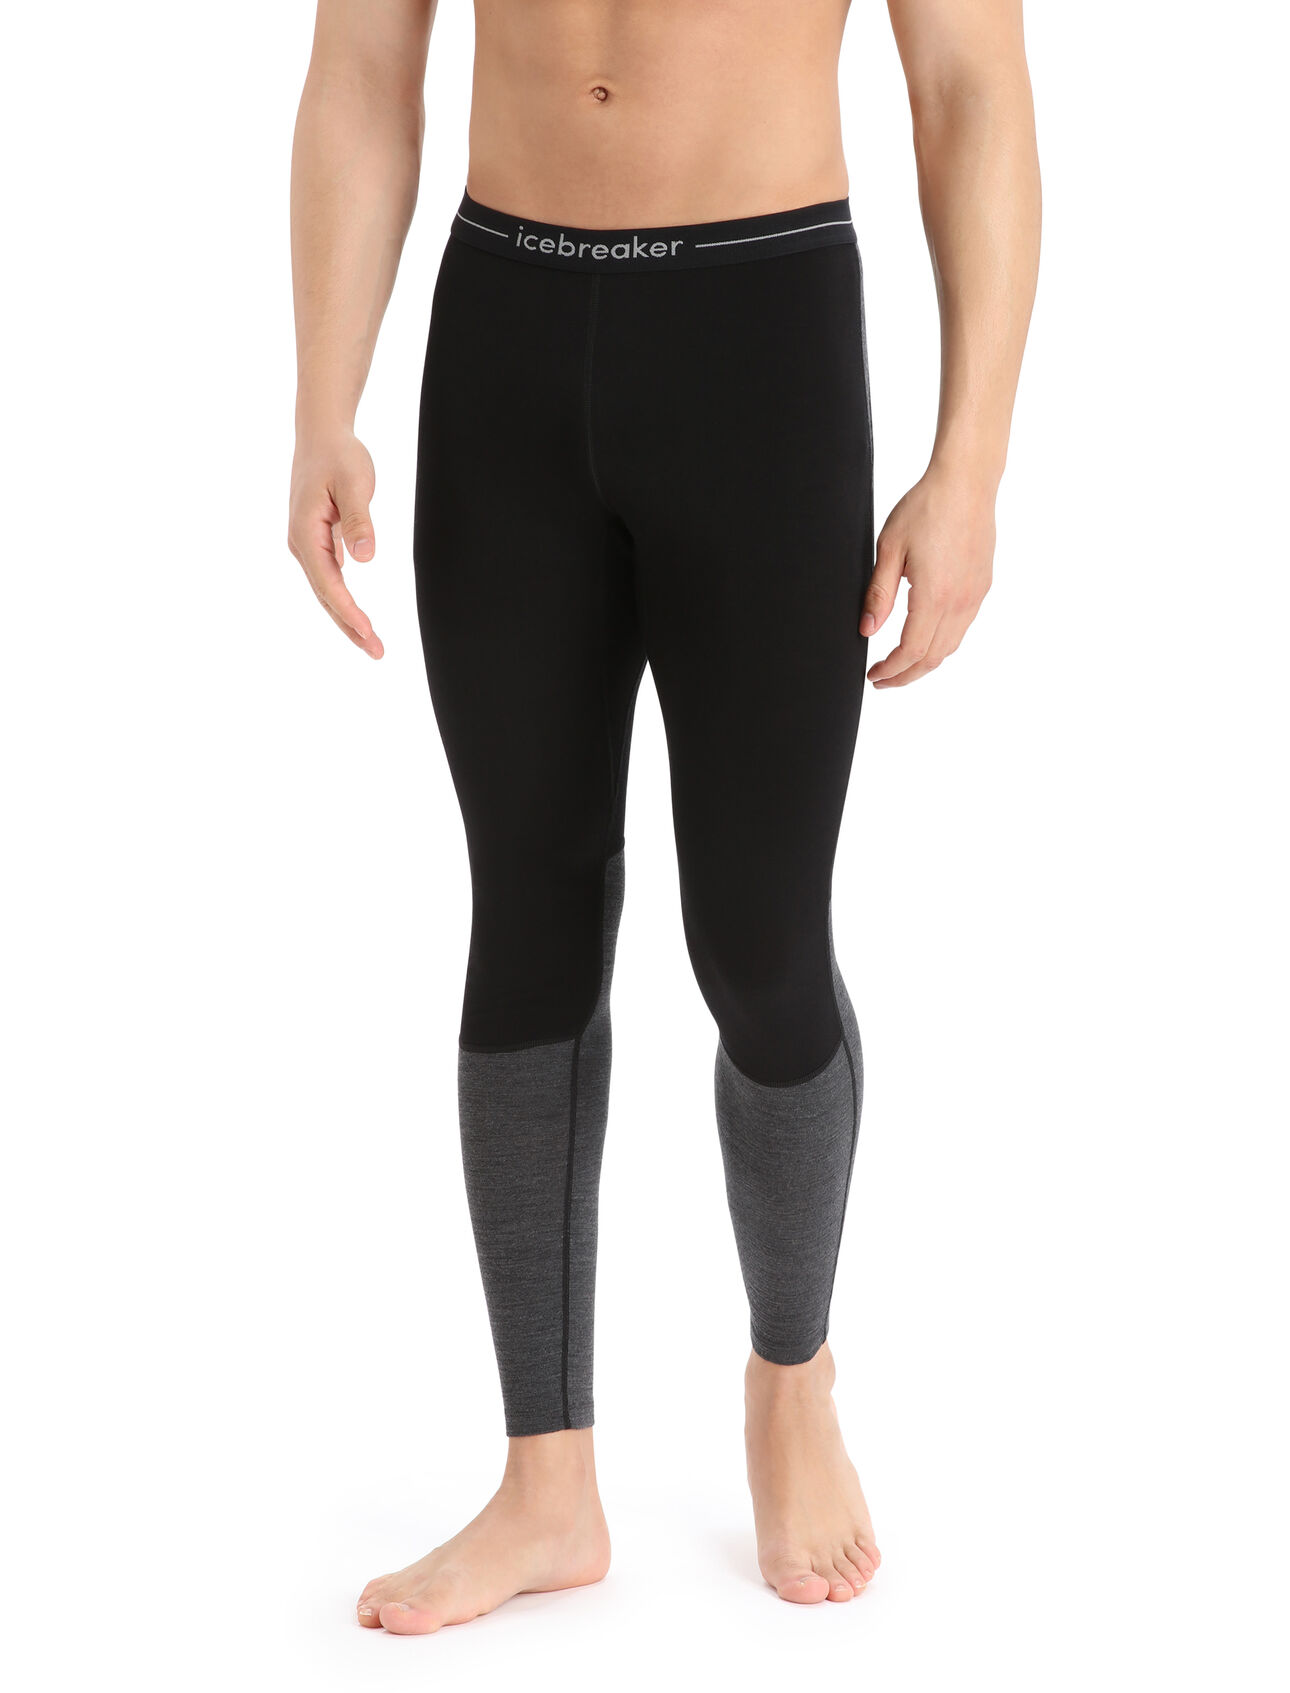 Mens 200 ZoneKnit™ Merino Leggings Midweight merino base layer bottoms designed to help regulate temperature during high-intensity activity, the 200 ZoneKnit™ Leggings feature 100% pure and natural merino wool.